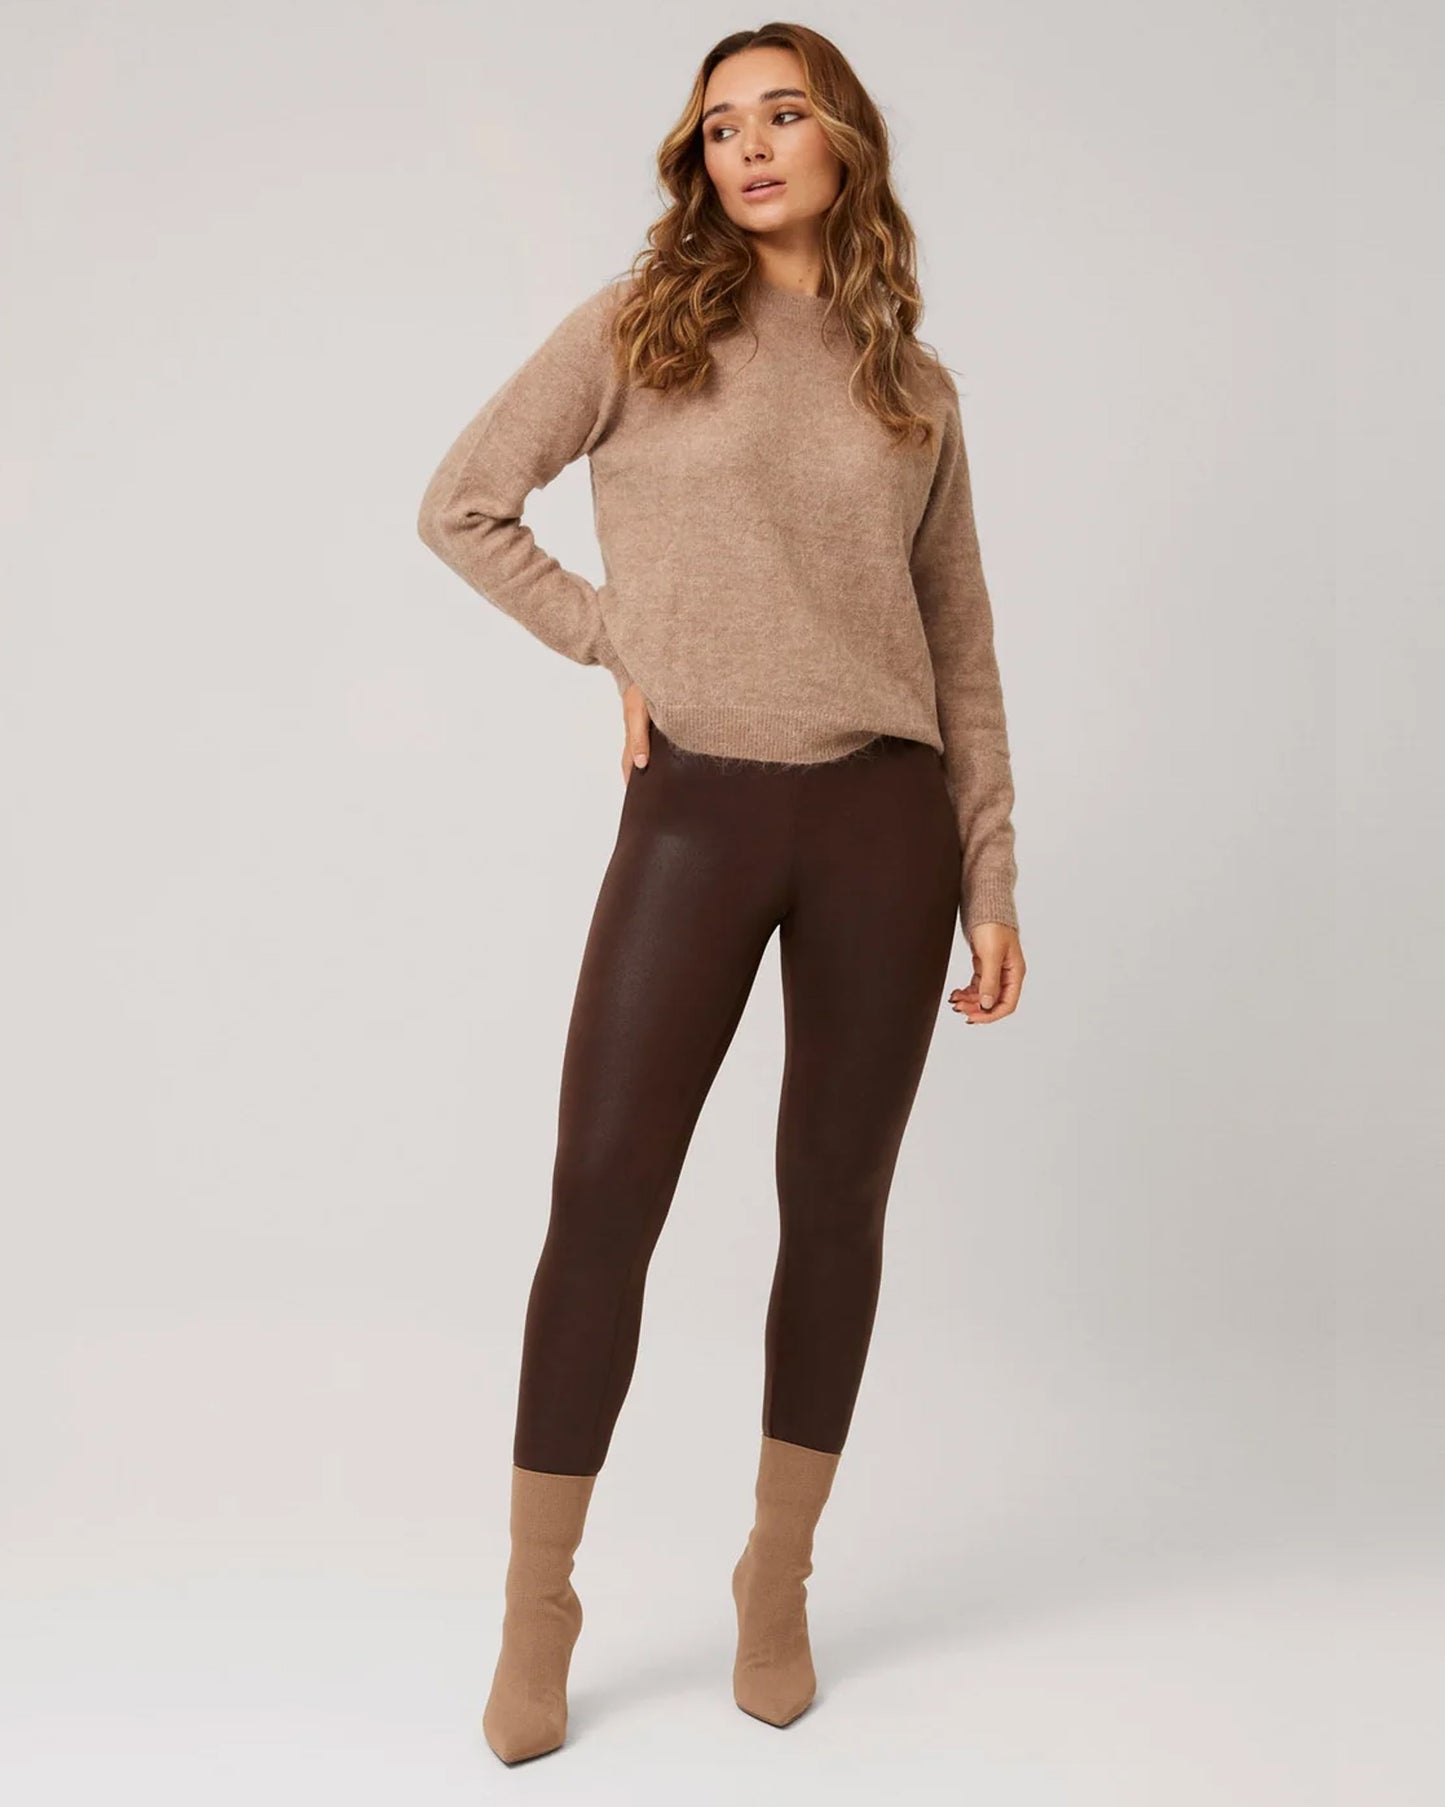 Ysabel Mora 70293 Waxed Thermal Leggings - Woman wearing a beige knitted jumper, brown high waisted thermal trouser leggings with waxed effect print and beige suede high heeled ankle boots.